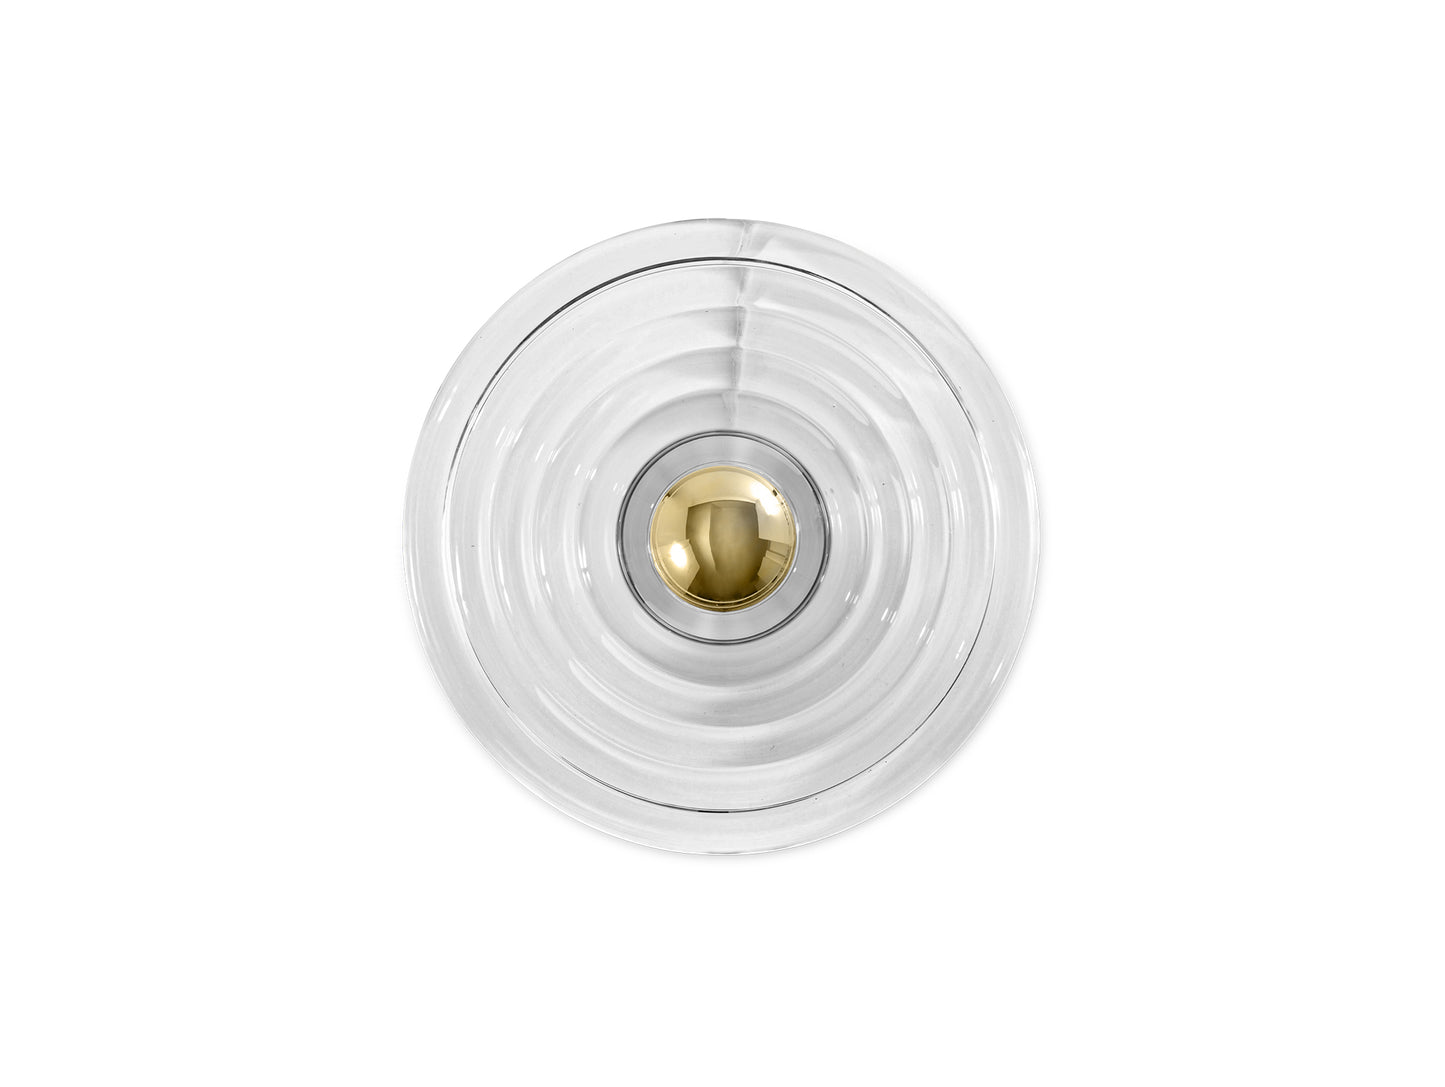 Press Surface LED Wall Lamp by Tom Dixon - Gold Cap